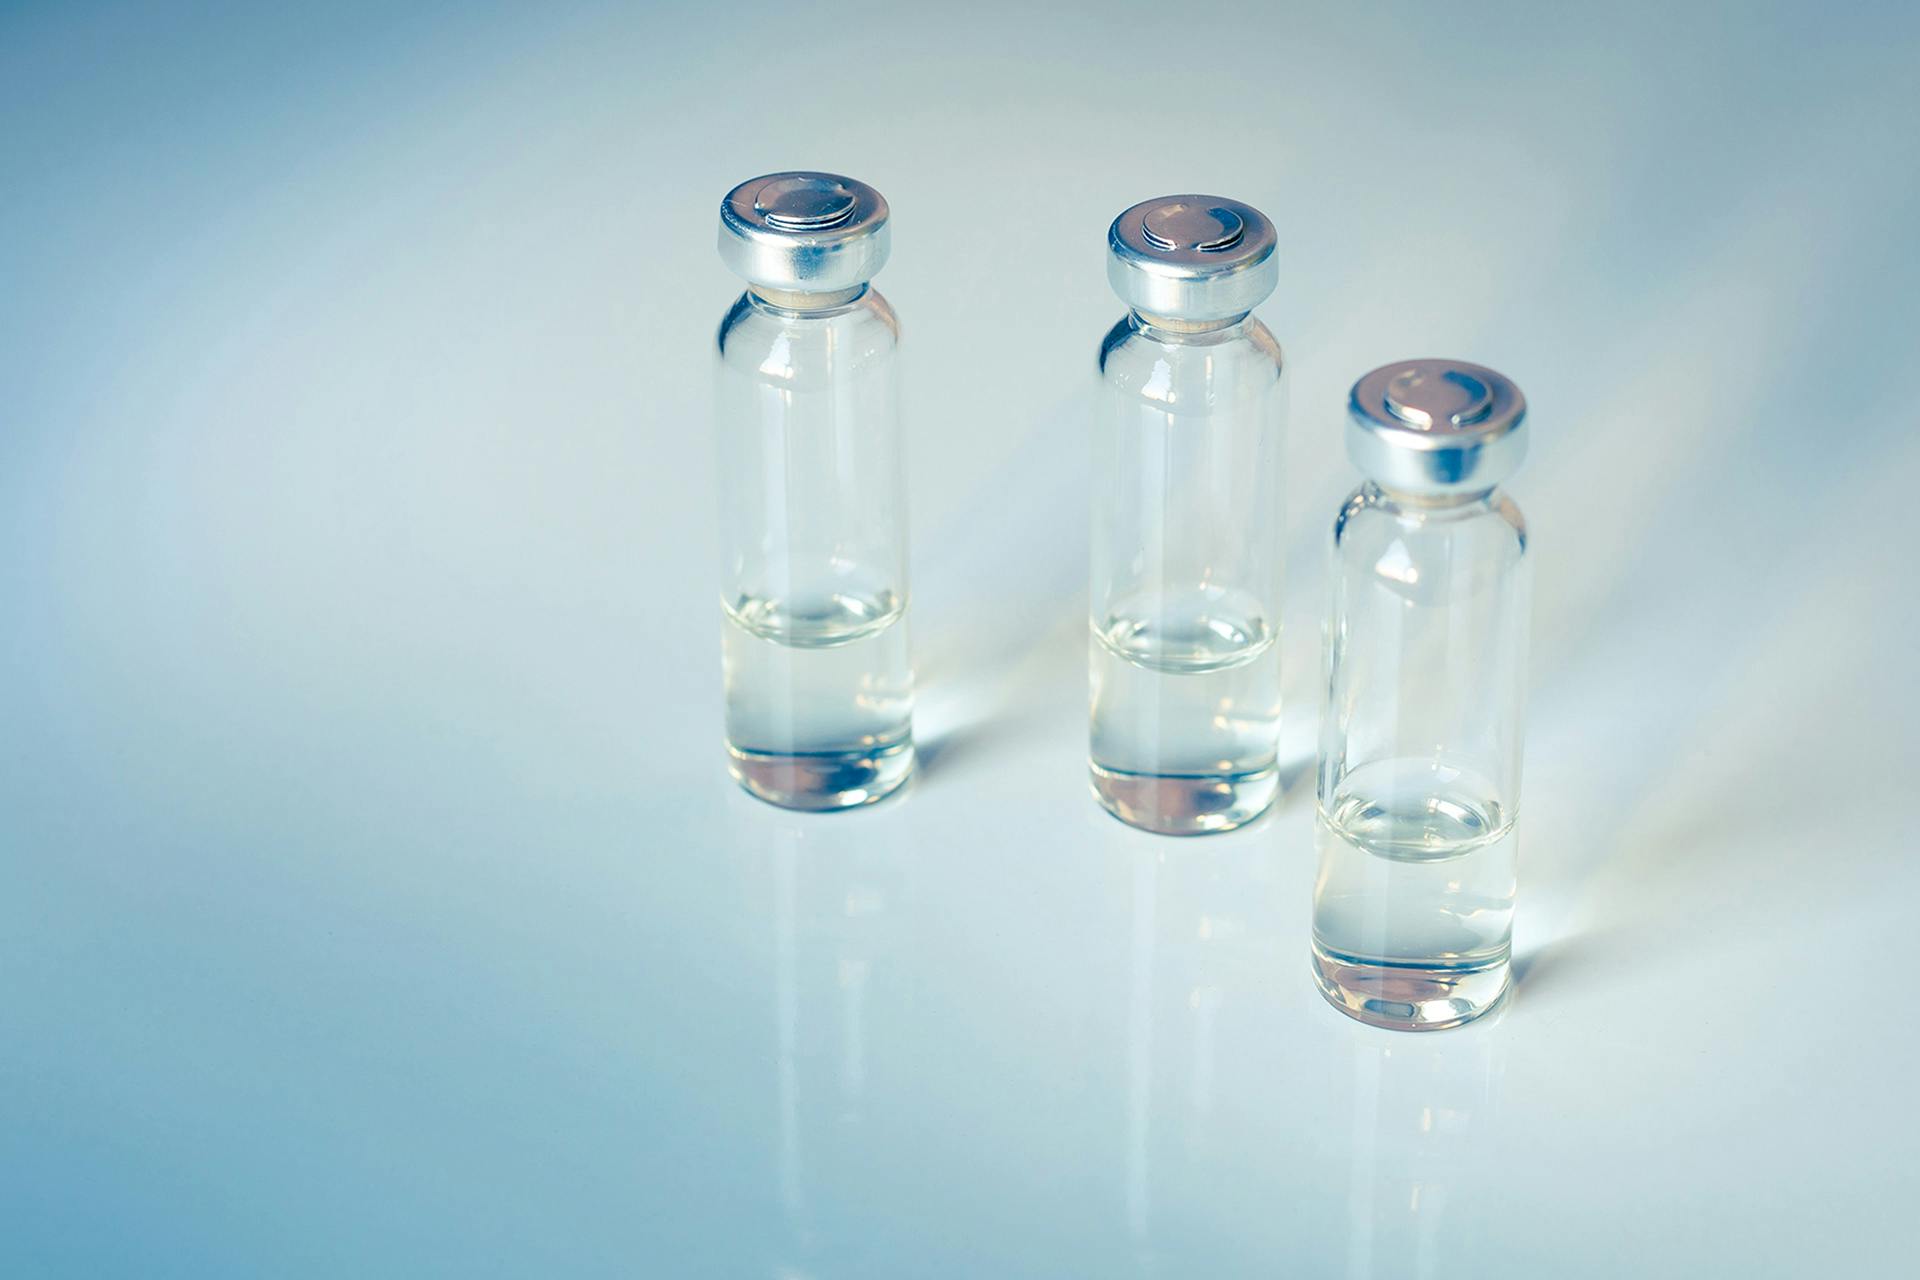 Objective Inspection of Vials and Crimping